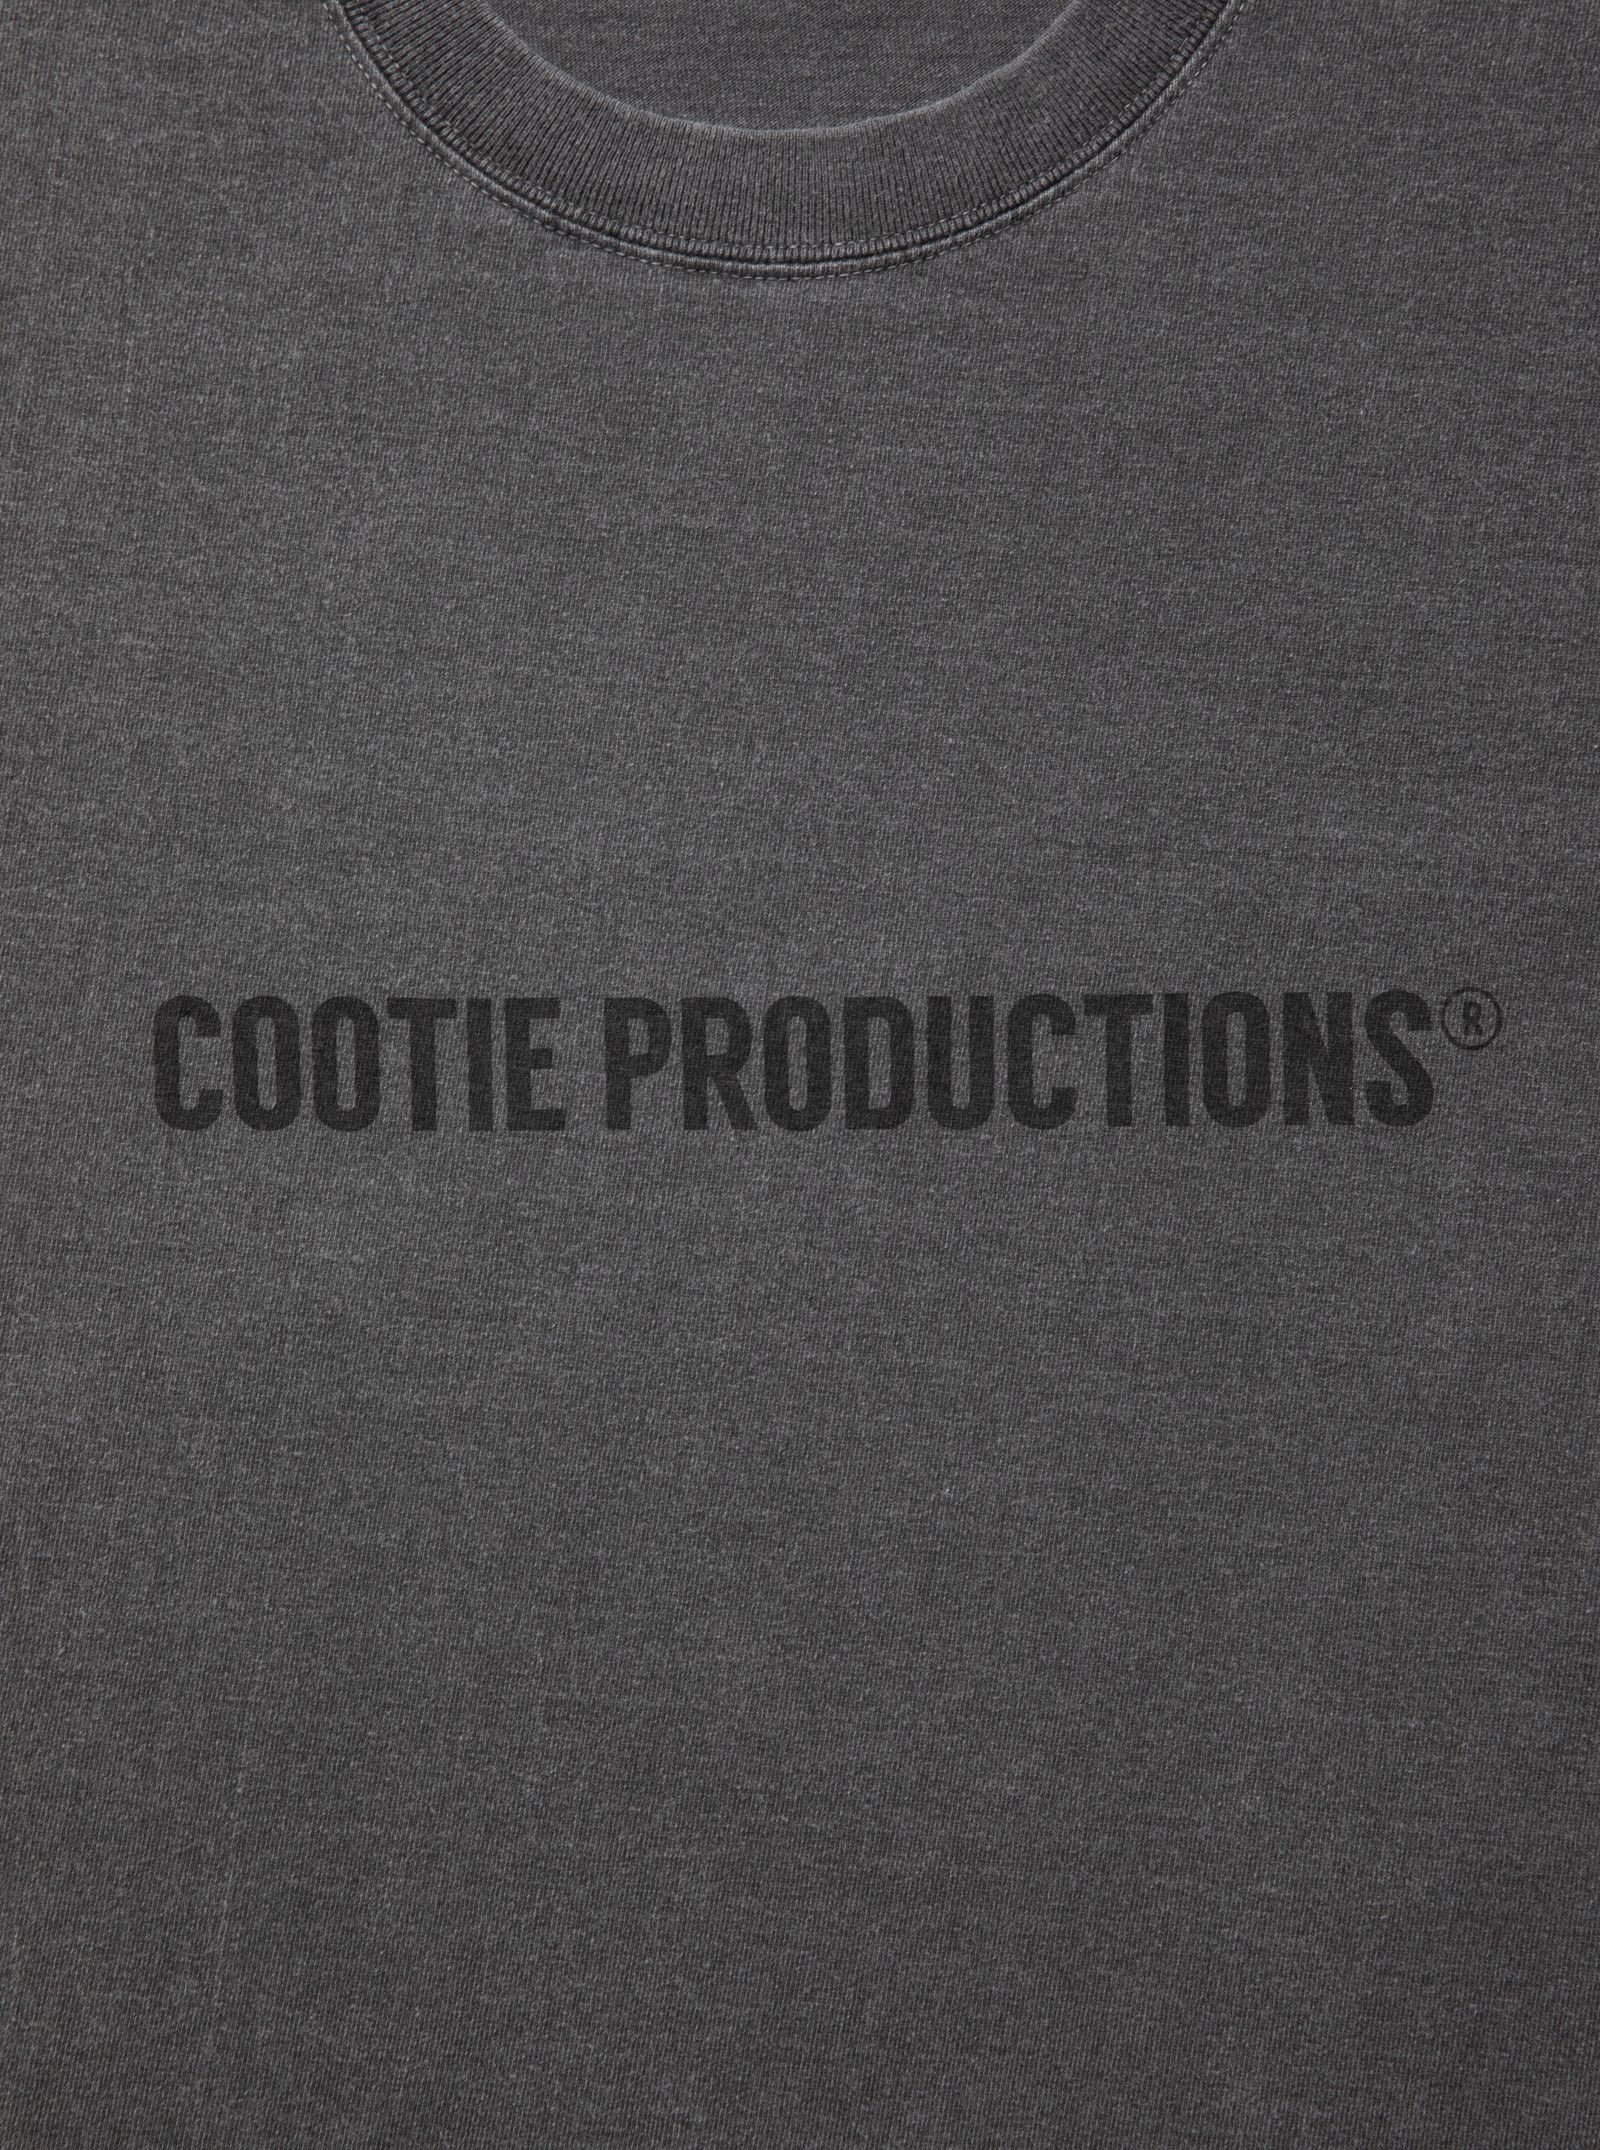 COOTIE PRODUCTIONS - Pigment Dyed L/S Tee (BLACK) / ピグメントダイ